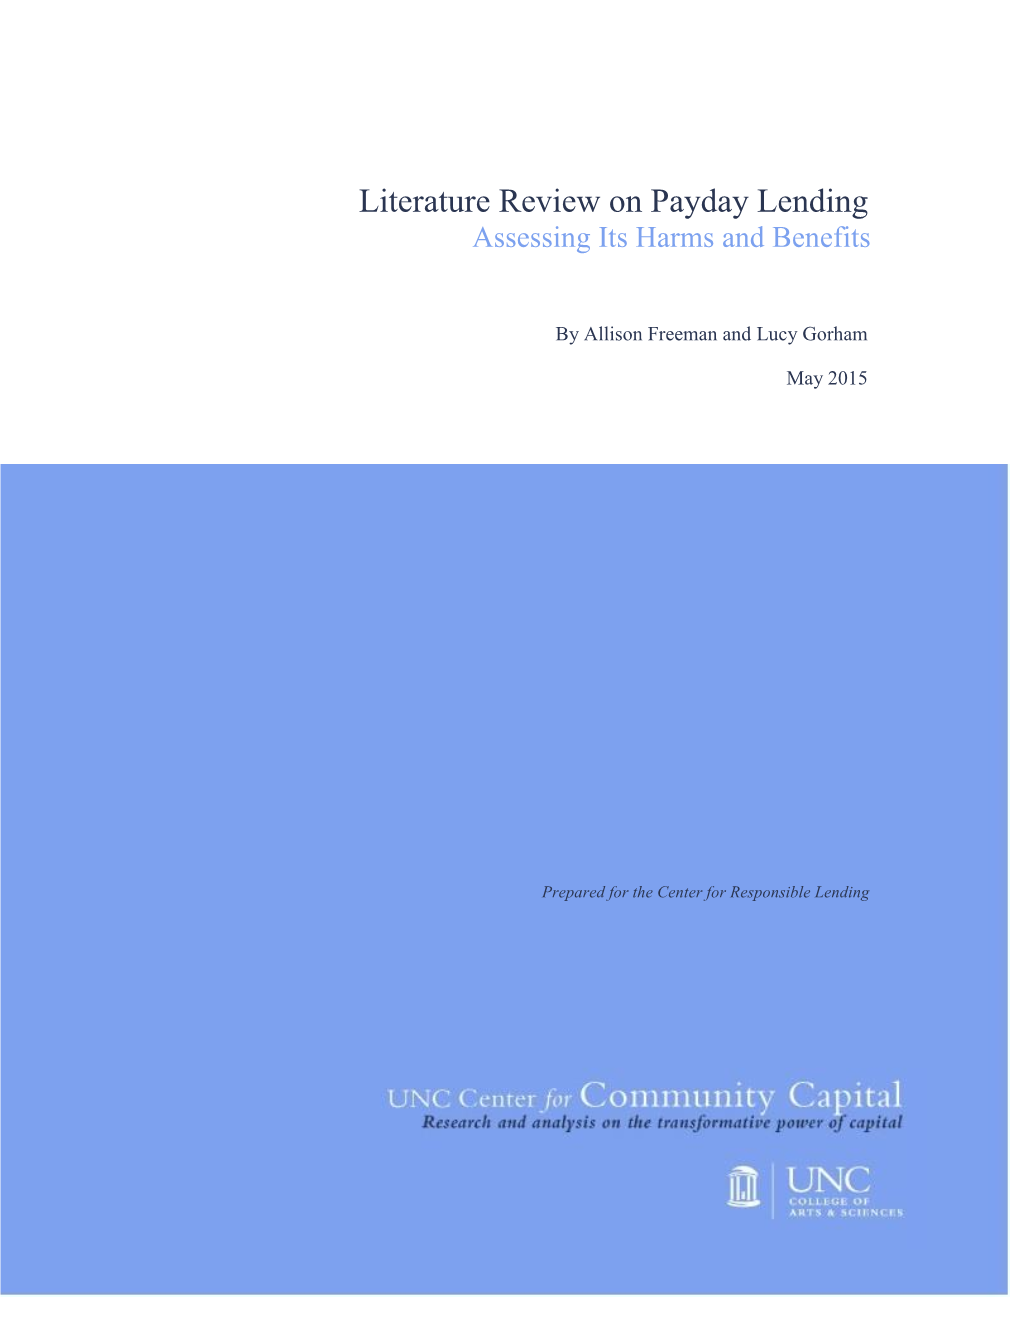 Literature Review on Payday Lending Assessing Its Harms and Benefits